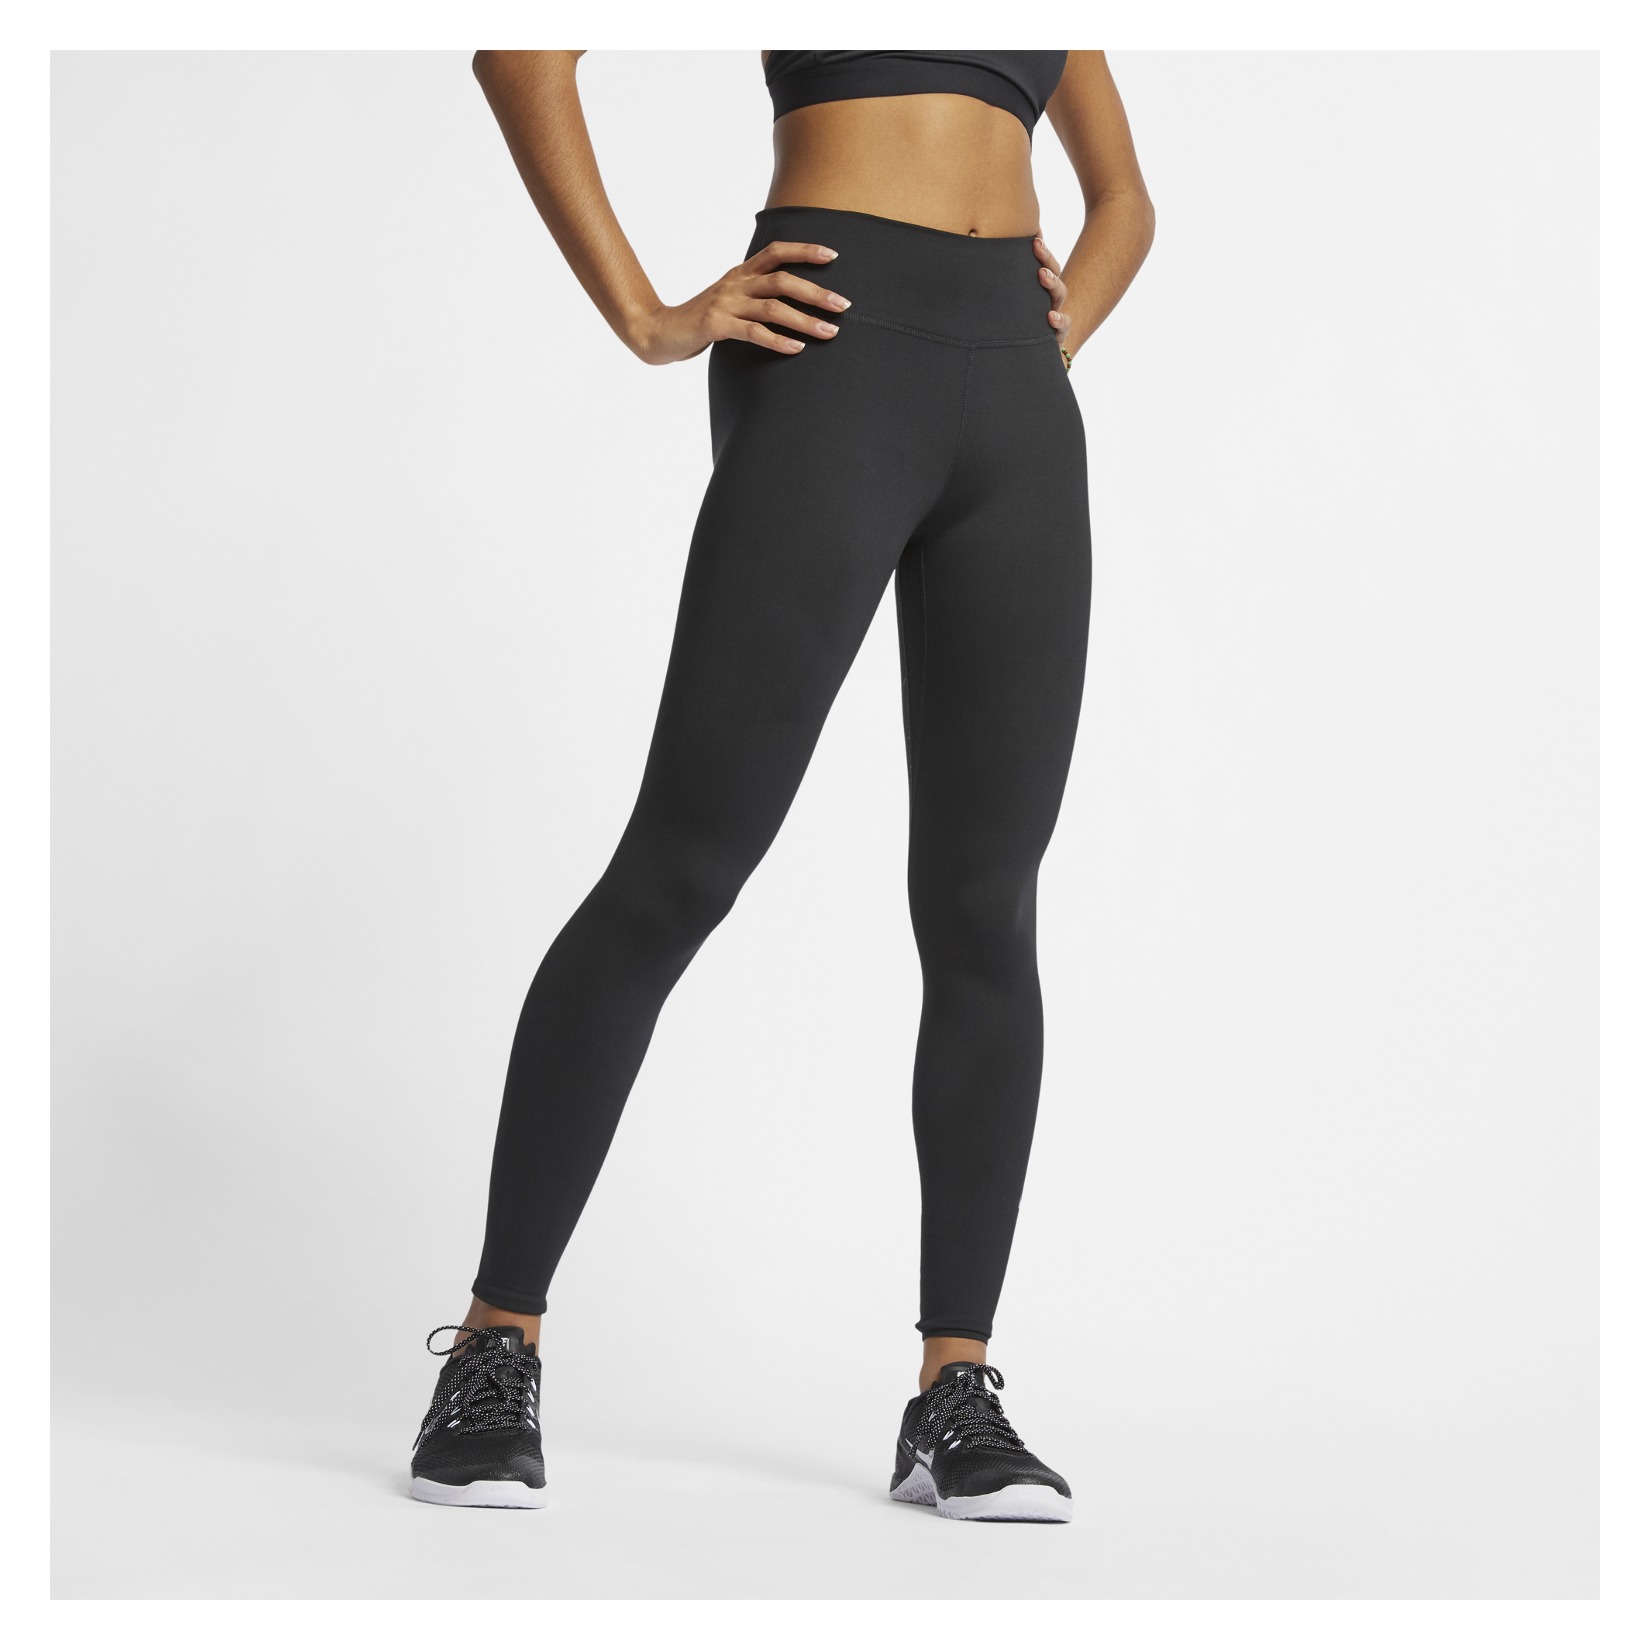 Nike One Luxe Women's Tights